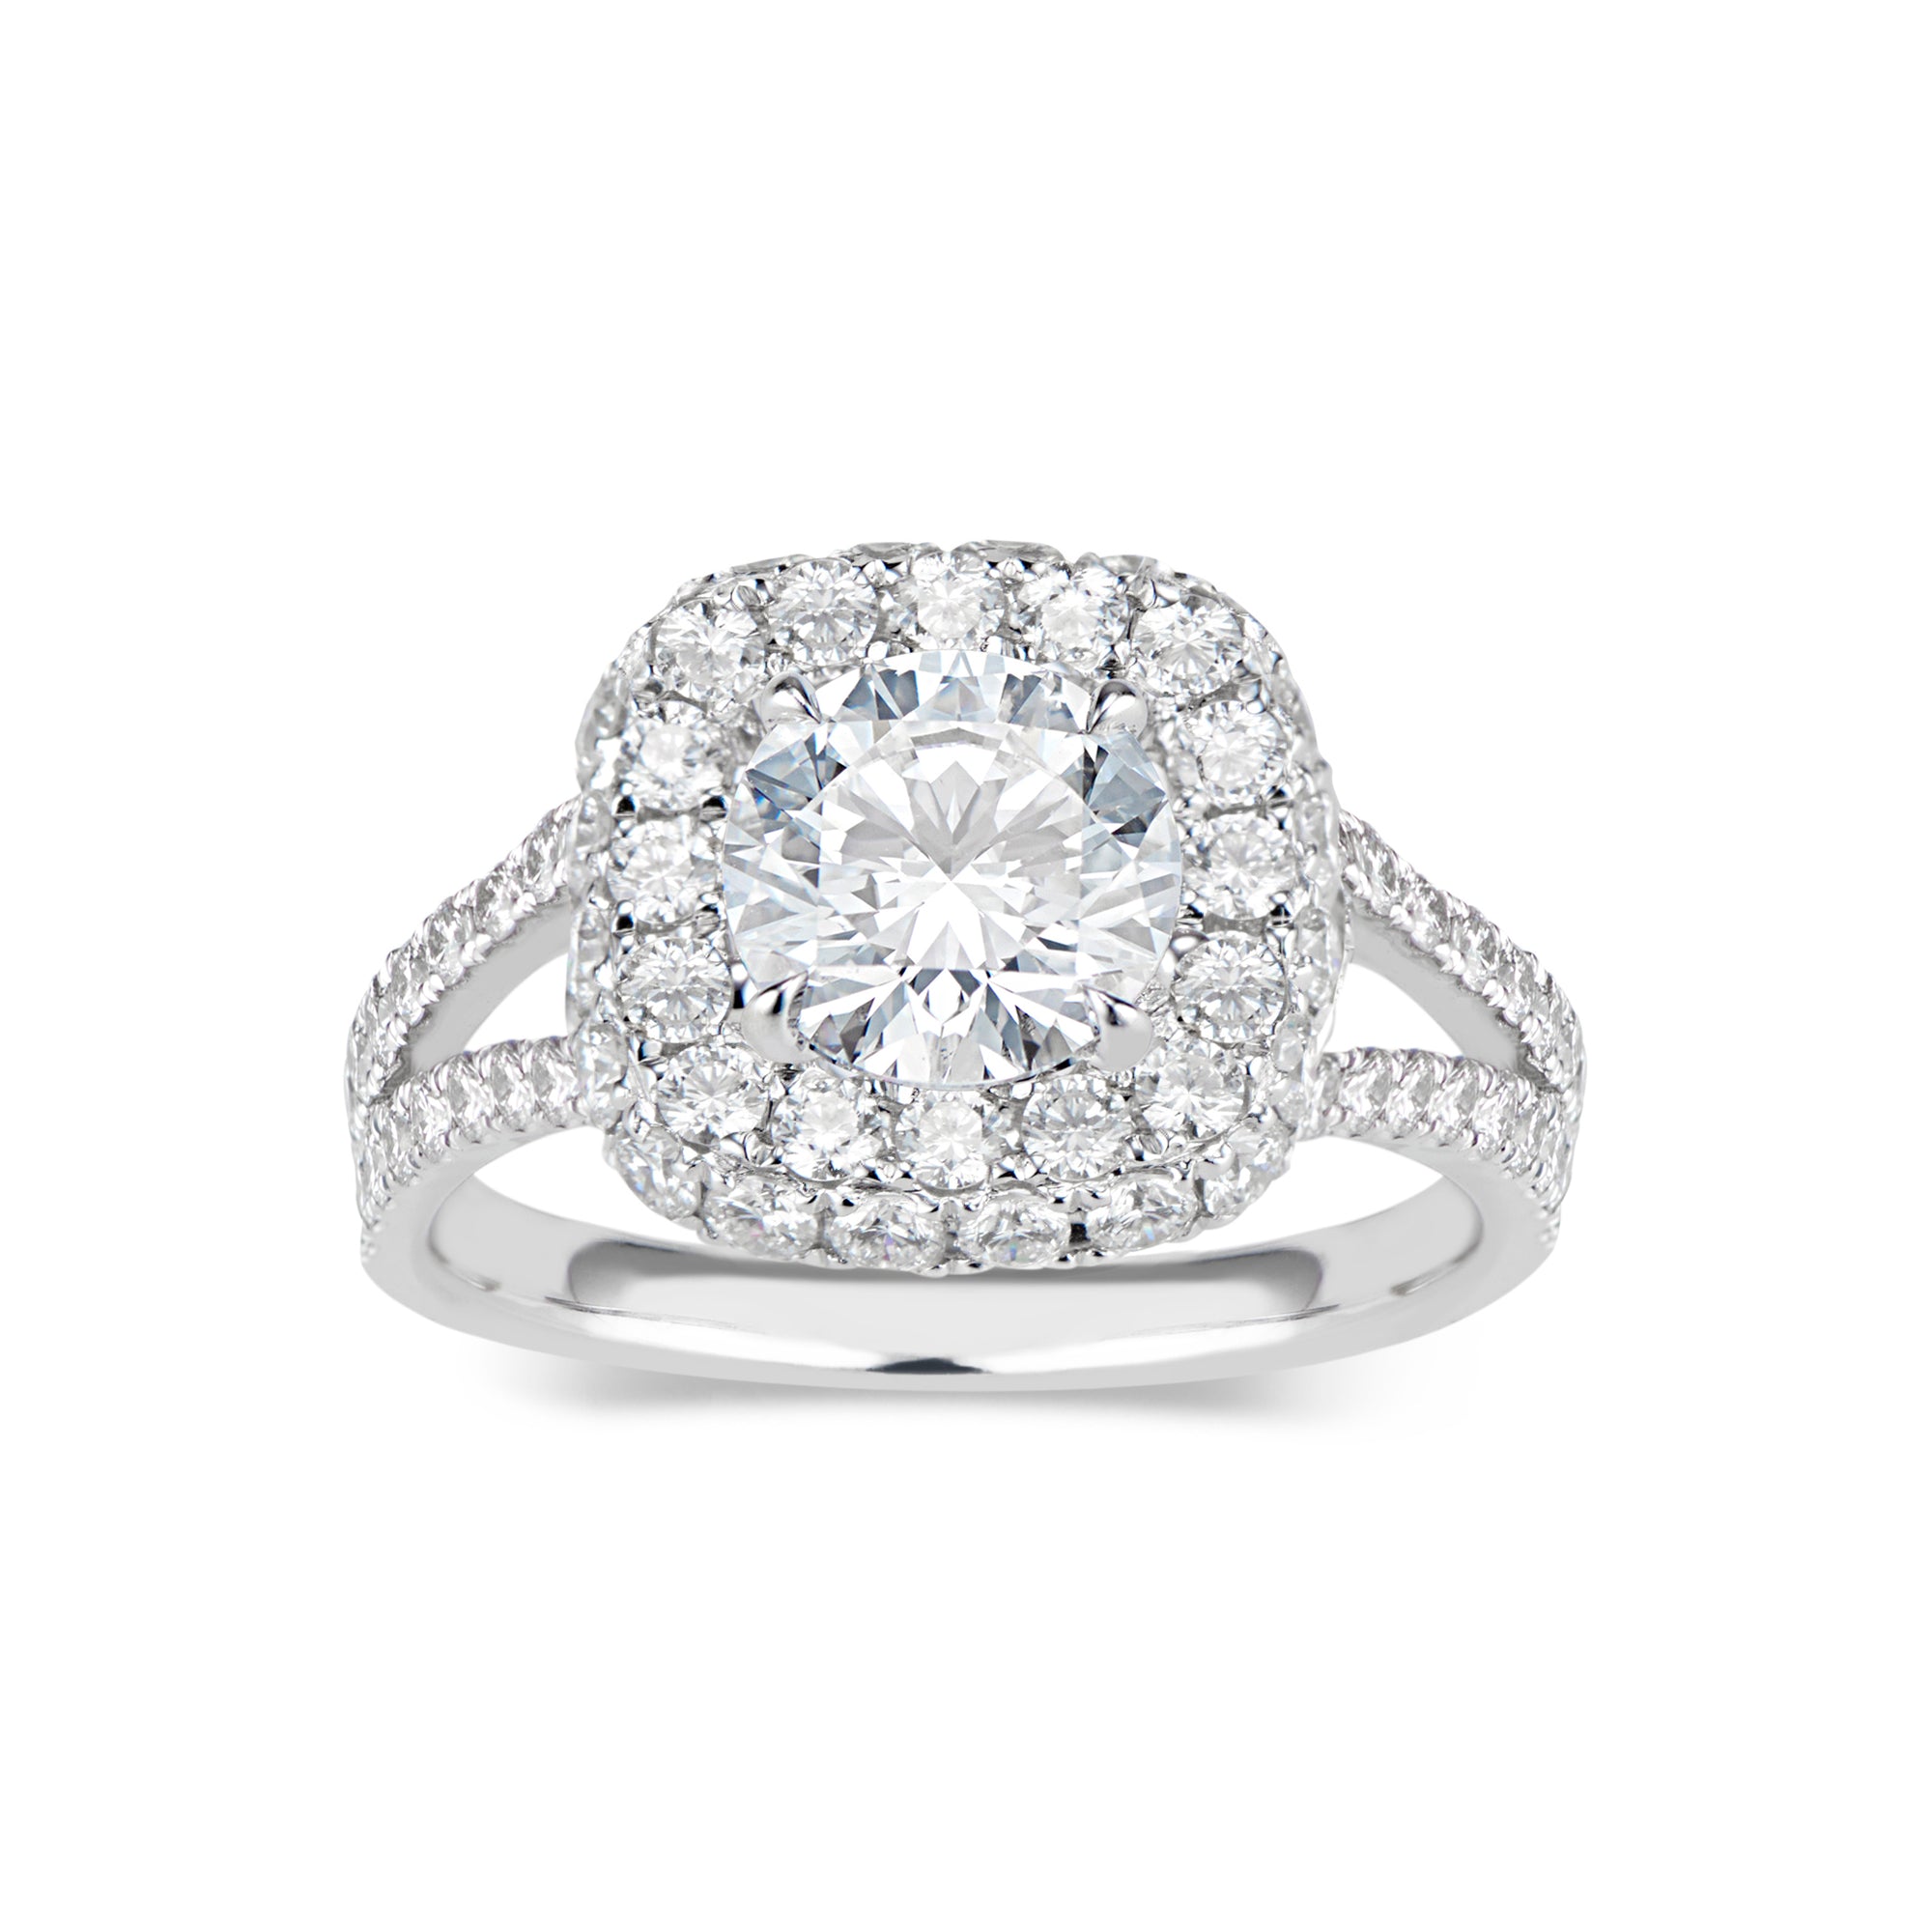 Cushion Double Edge Halo Diamond Engagement Ring with Split Shank   - 70 round diamonds totaling 1.66 carats  GIA graded F-G color, VS2-SI1 clarity